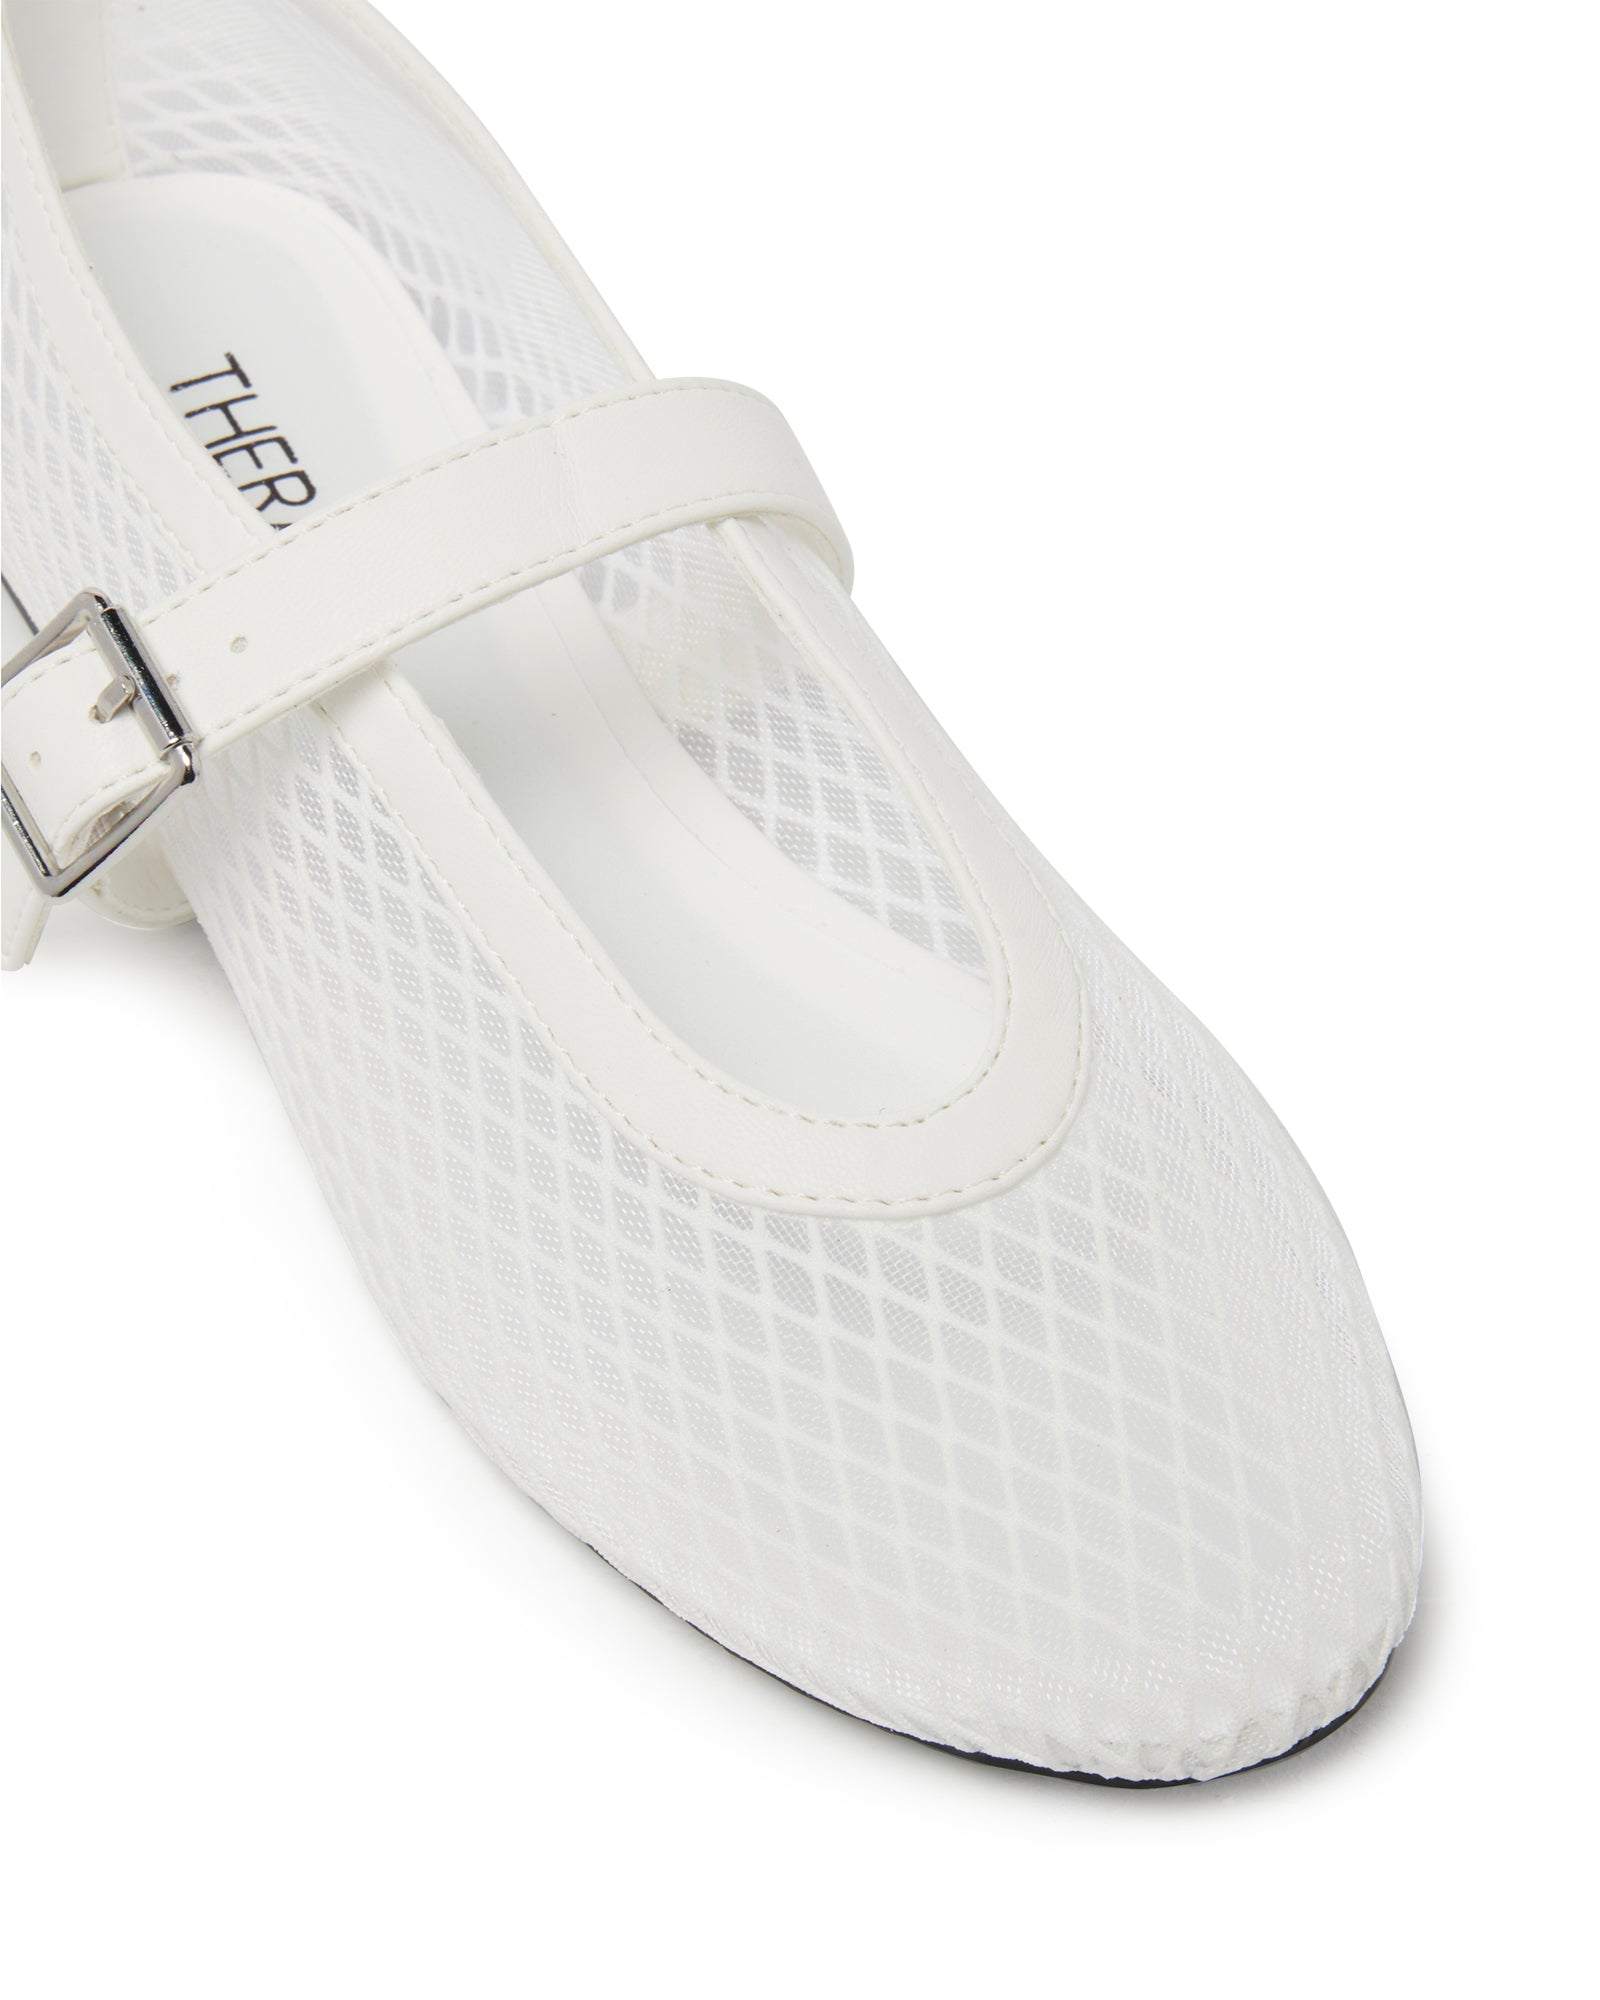 Therapy Shoes Addie White | Women's Flat | Ballet | Mesh